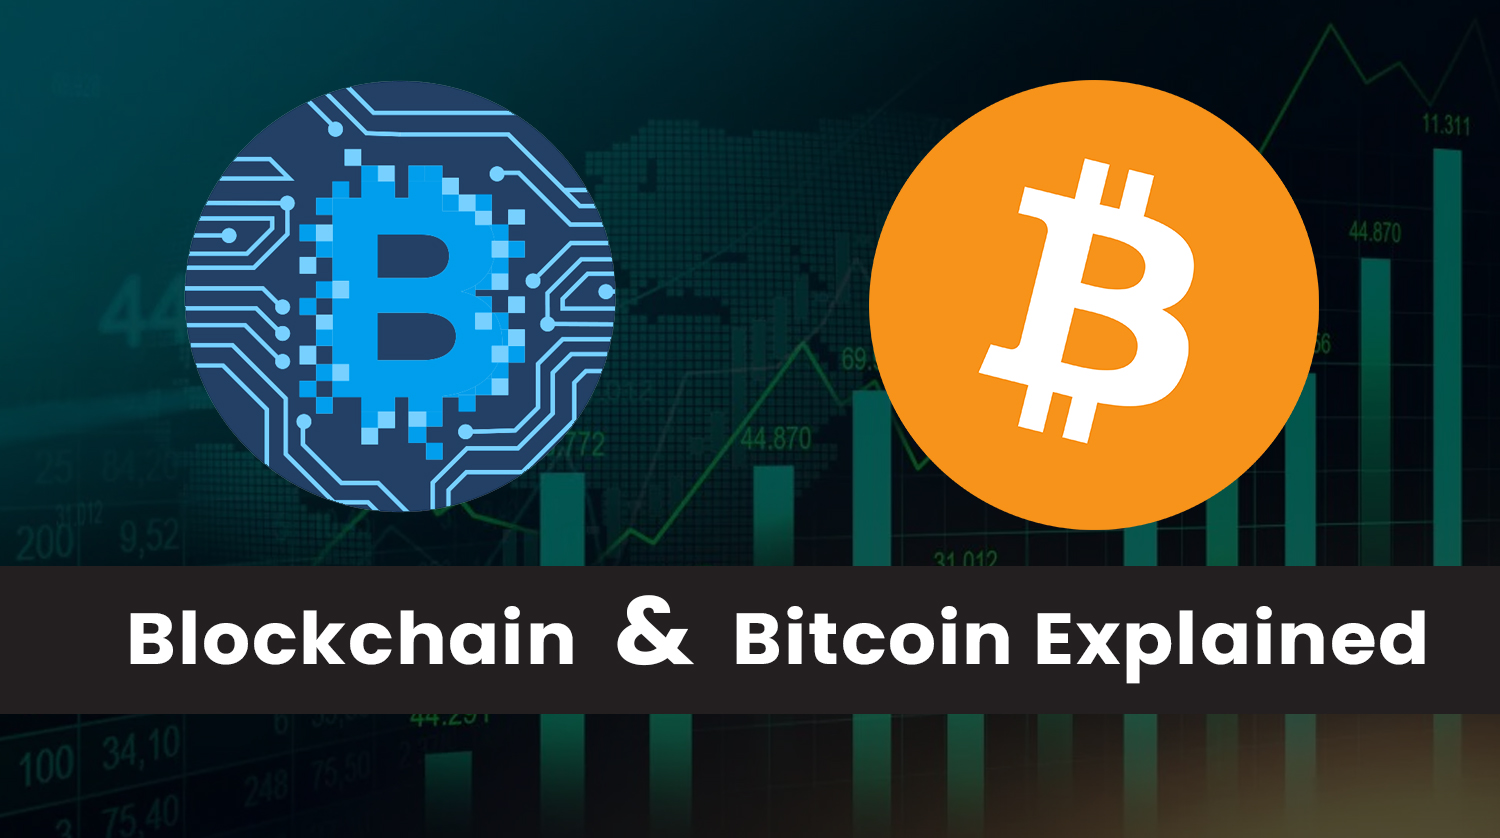 Bitcoin & Blockchain explained. Know the difference, application of them.